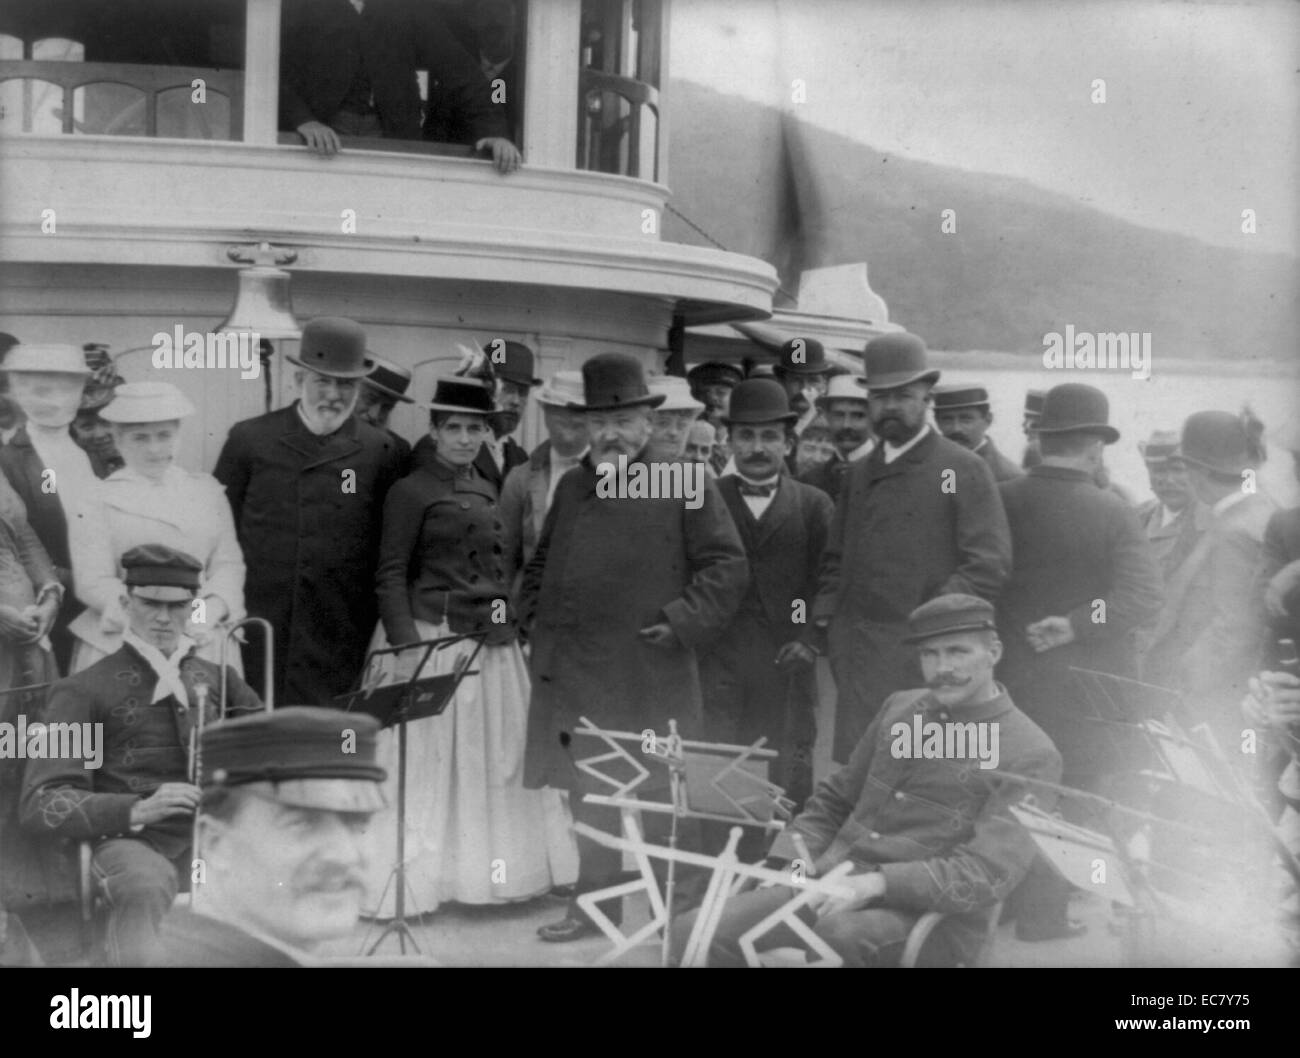 President Benjamin Harrison with James G. Blaine, Secretary of State, Henry Cabot Lodge, and group of other people posed, possibly on the forward deck of the Frenchman's Bay steamer Sappho, with several men of the Bar Harbor Band, Maine 1892 Stock Photo